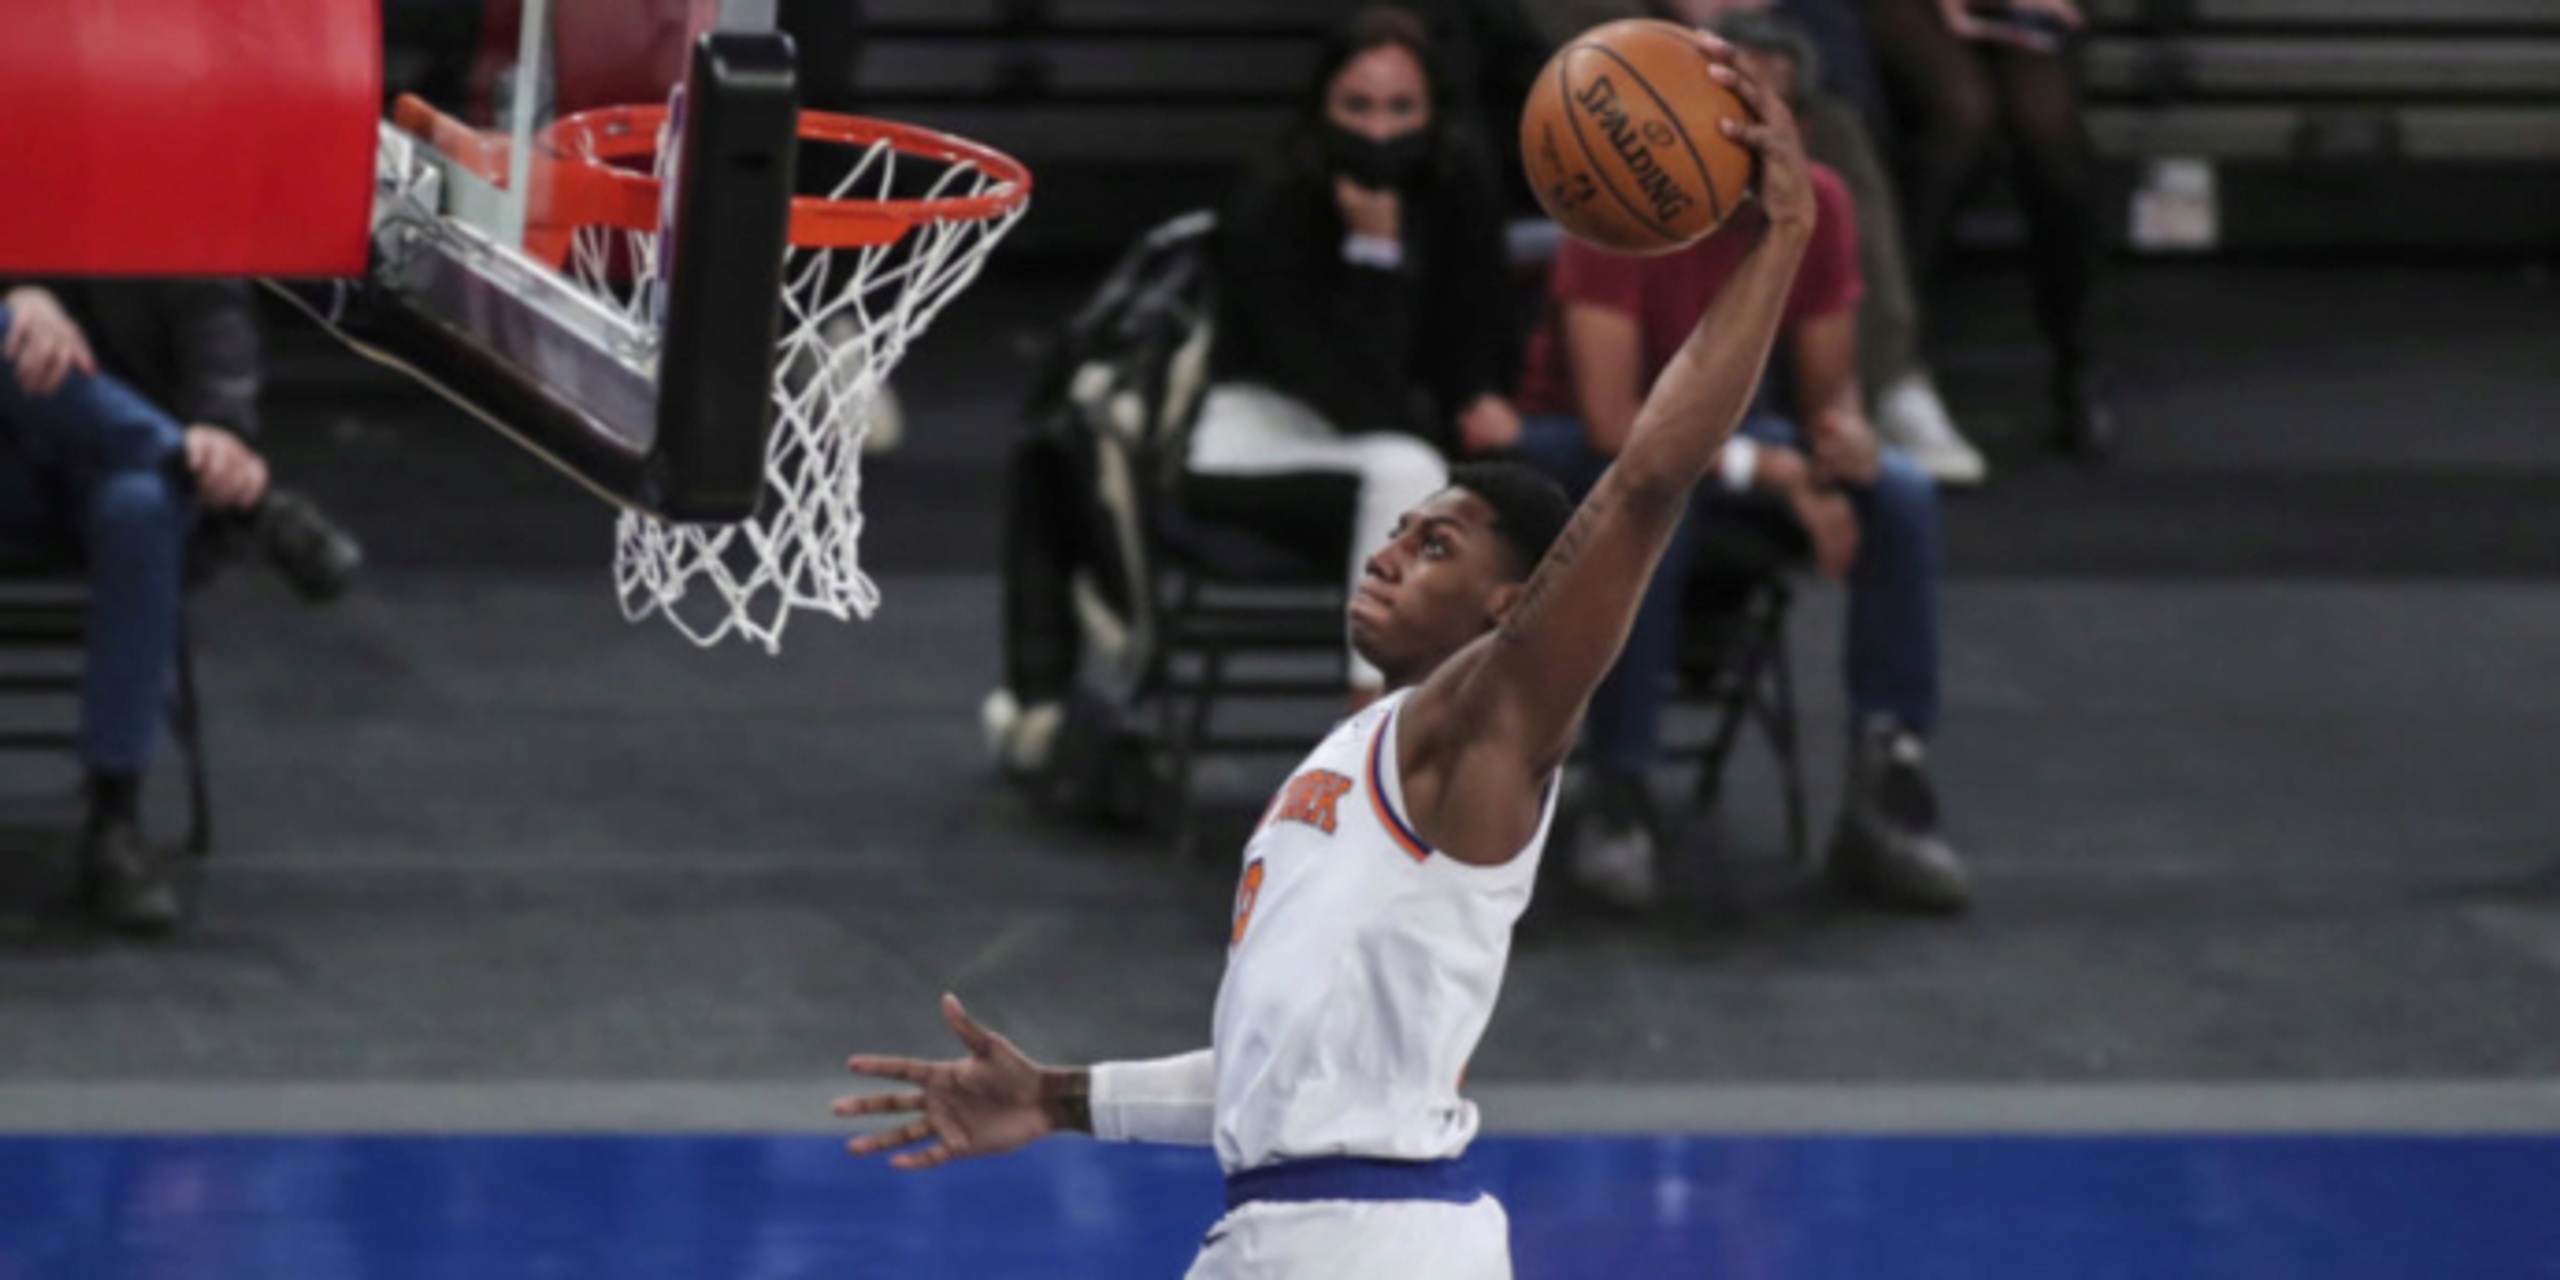 It's about time we talk about the improvement of RJ Barrett